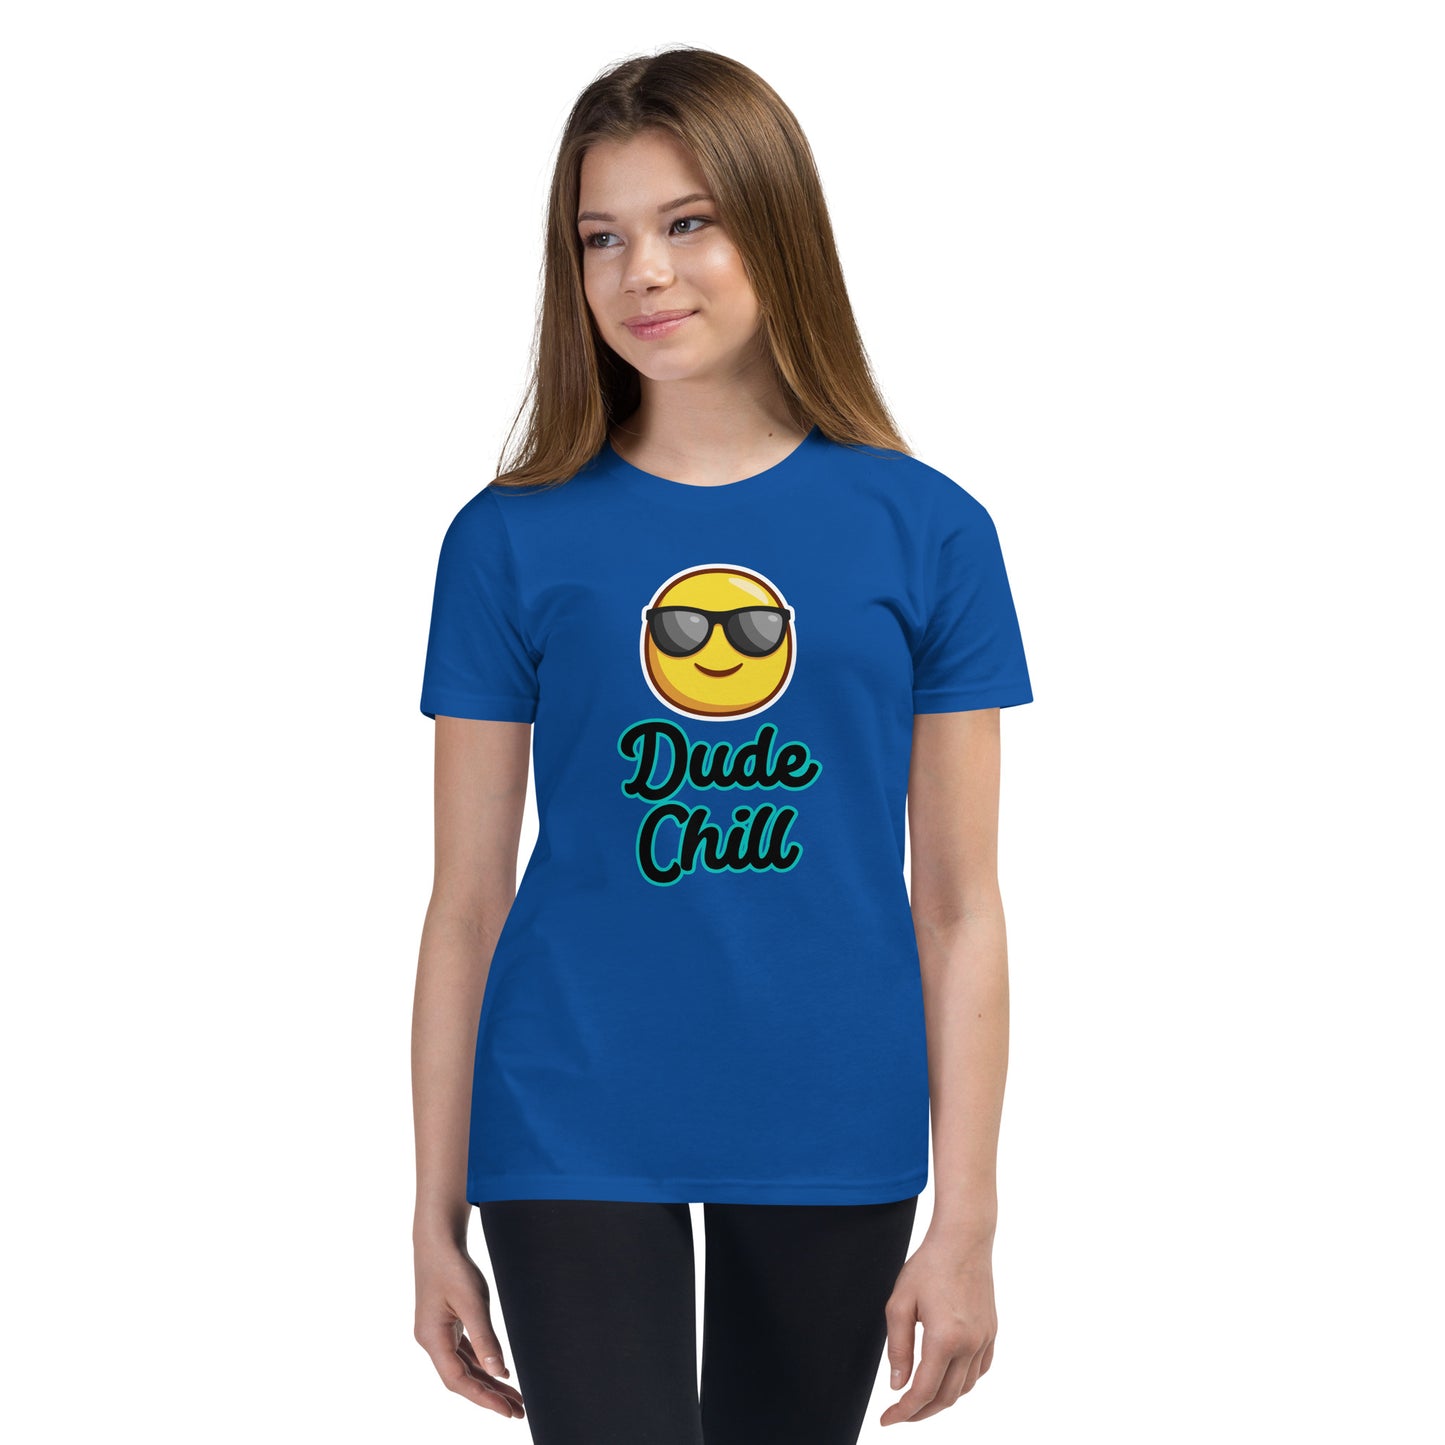 Dude Chill Youth Short Sleeve T-Shirt